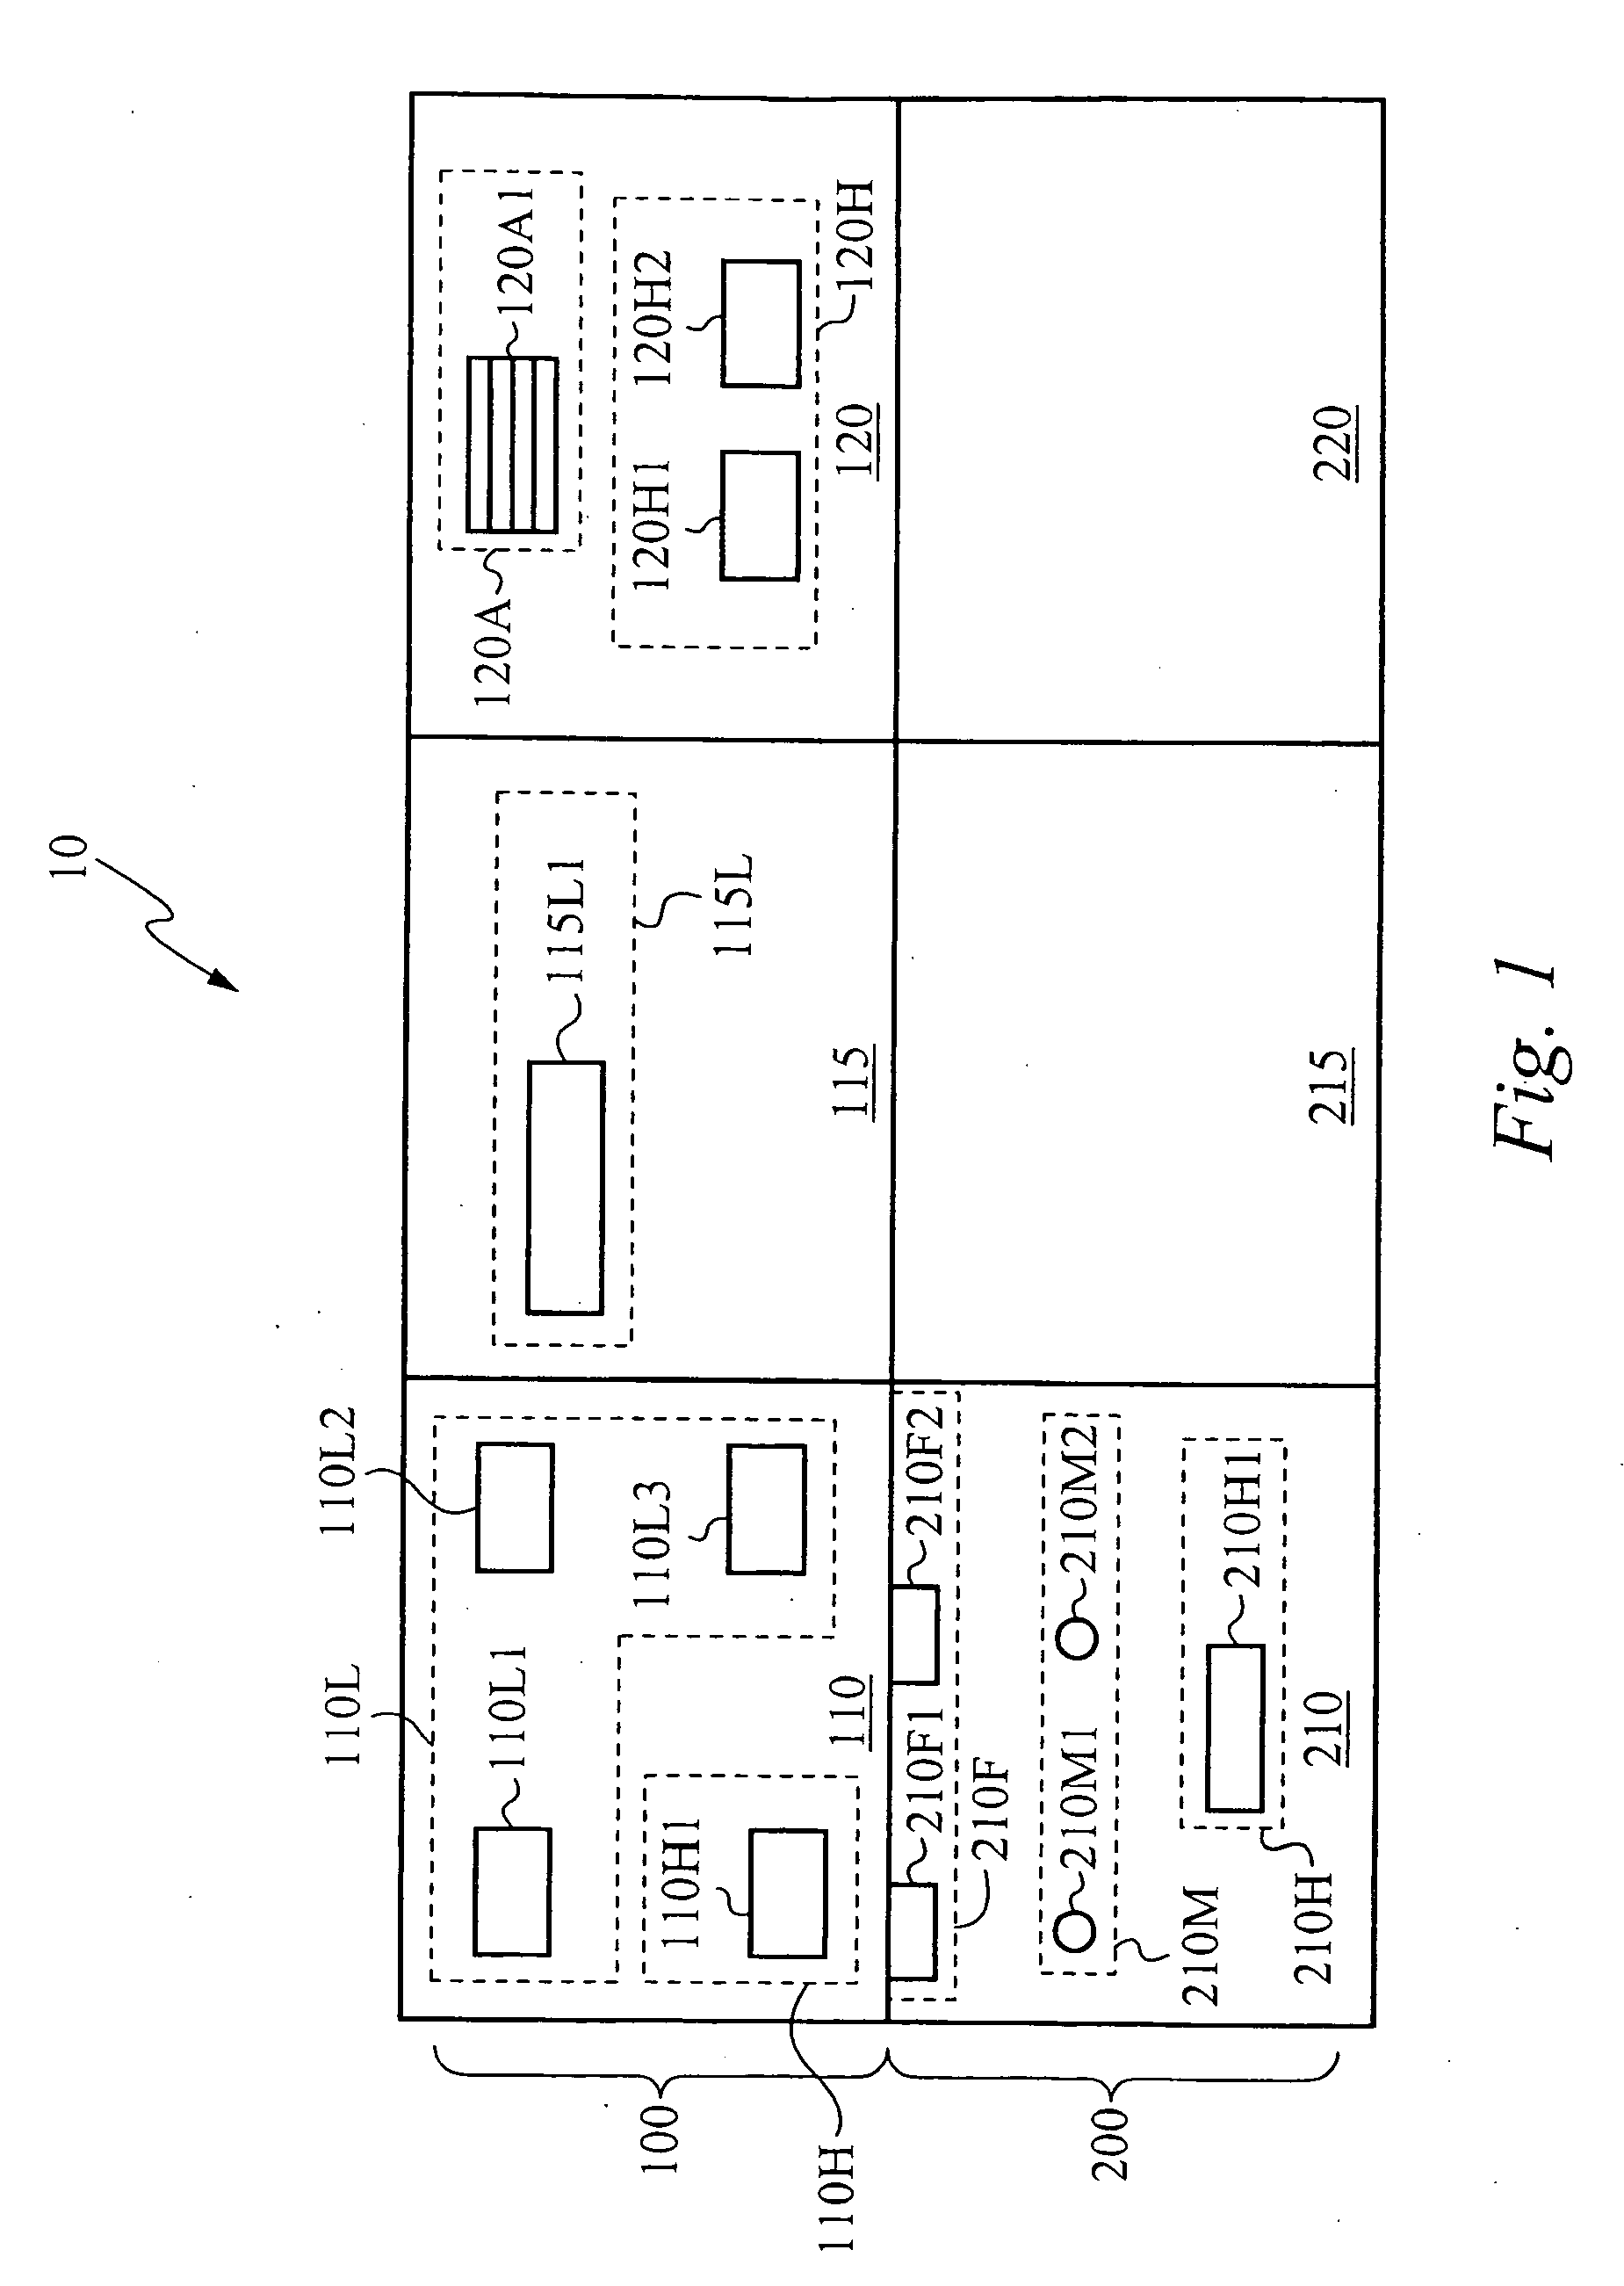 Location-based addressing lighting and environmental control system, device and method